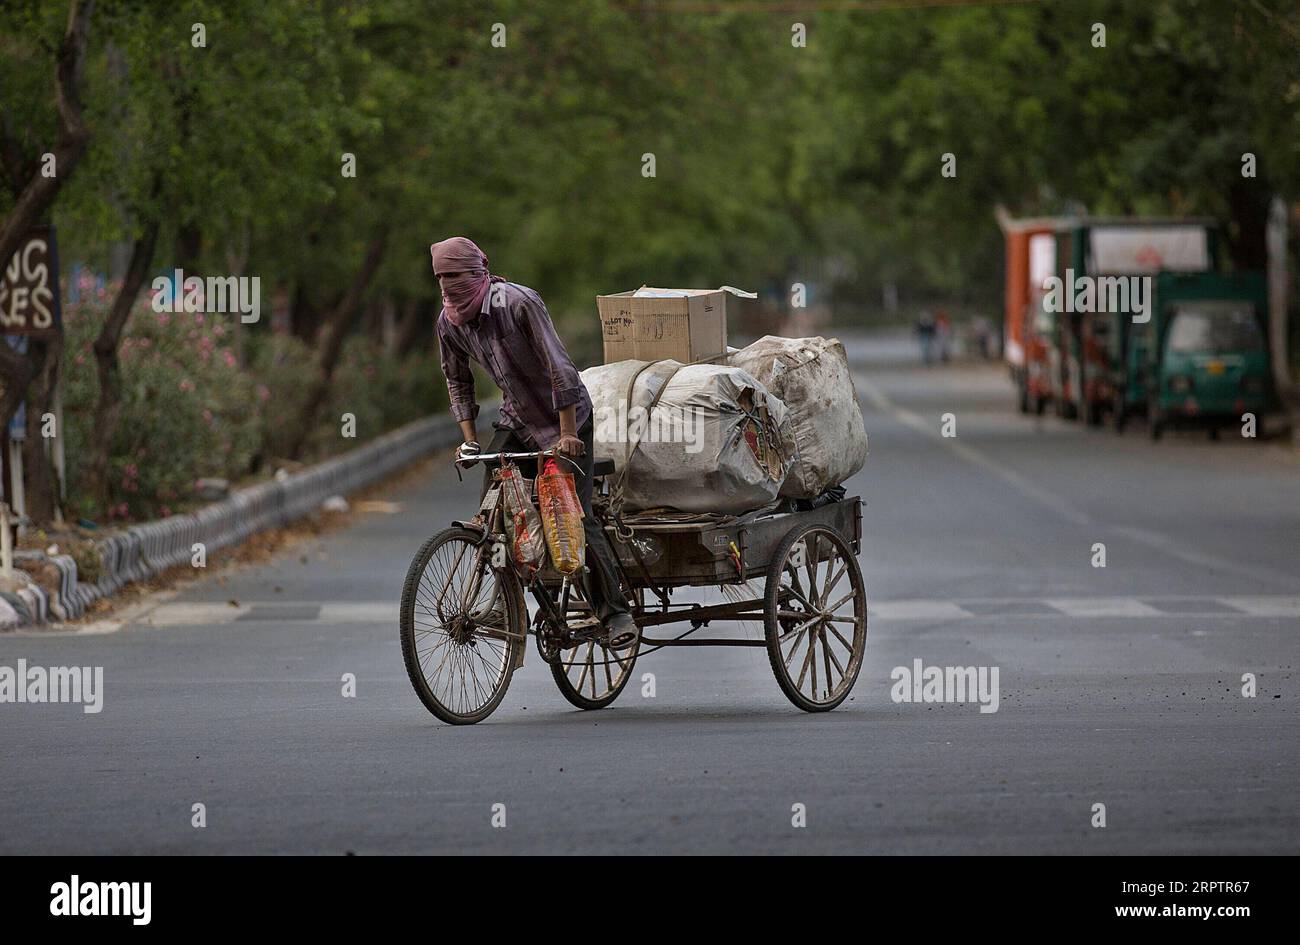 200417 -- NEW DELHI, April 17, 2020 -- A ragpicker drives his rickshaw on an empty road during the lockdown due to COVID-19, in New Delhi, India, April 17, 2020. India s federal health ministry Friday evening said the death toll due to COVID-19 in India rose to 452 and the total number of confirmed cases in the country reached 13,835.  INDIA-NEW DELHI-COVID-19 JavedxDar PUBLICATIONxNOTxINxCHN Stock Photo